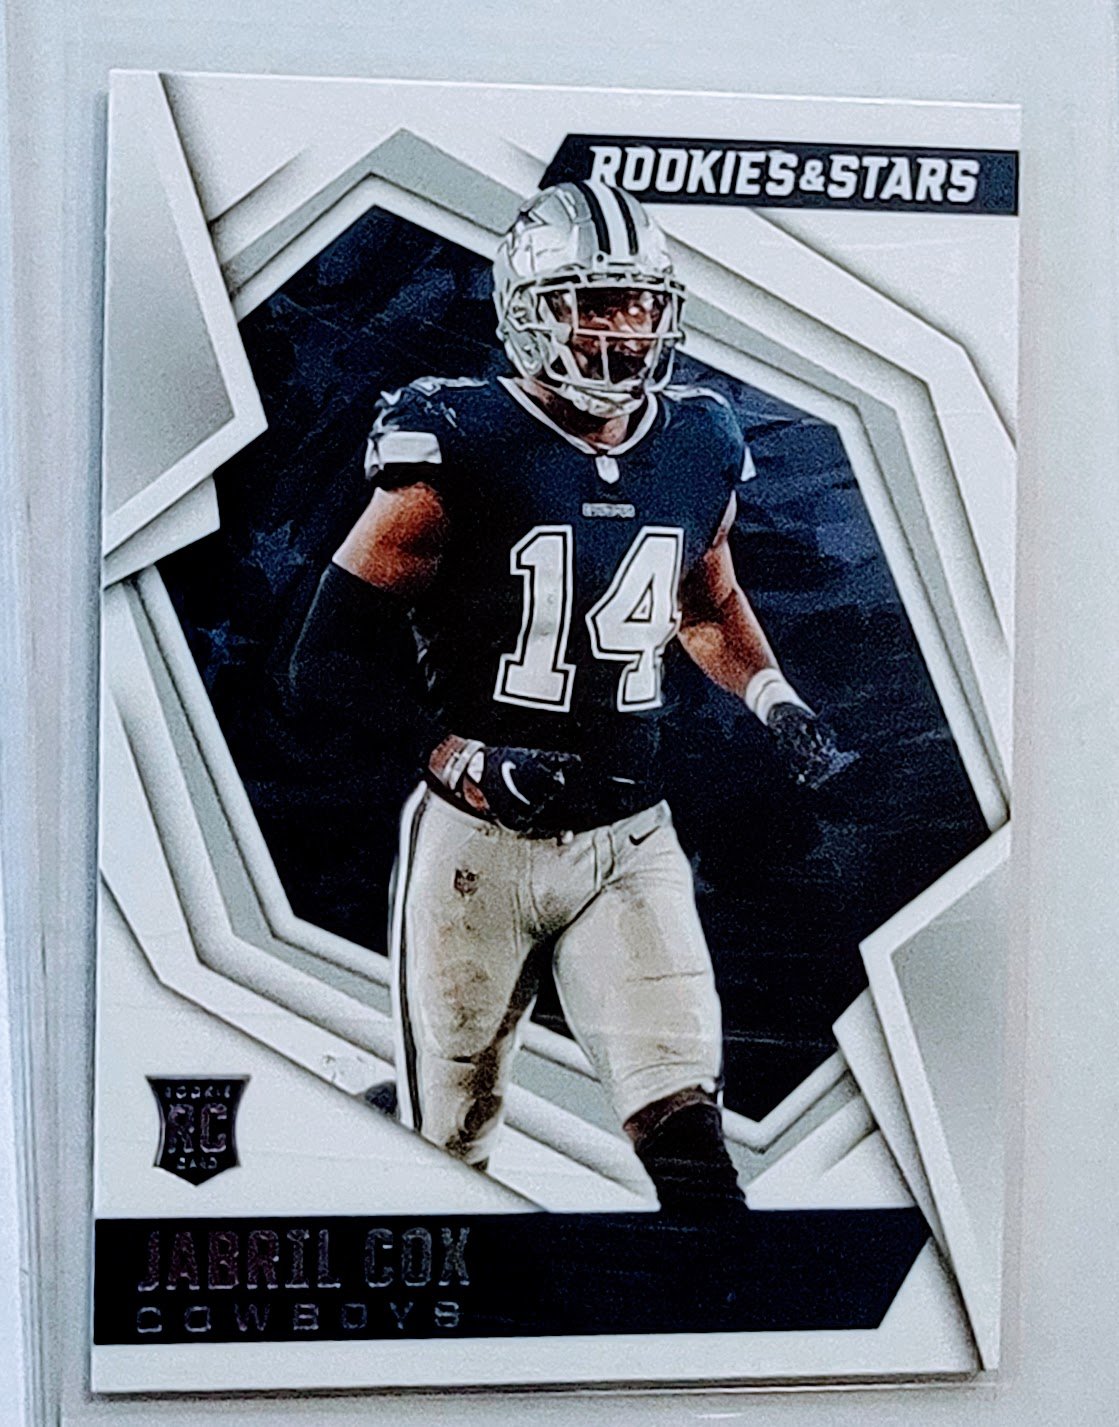 2021 Panini Rookies and Stars Jabril Cox Rookie Football Card AVM1 simple Xclusive Collectibles   